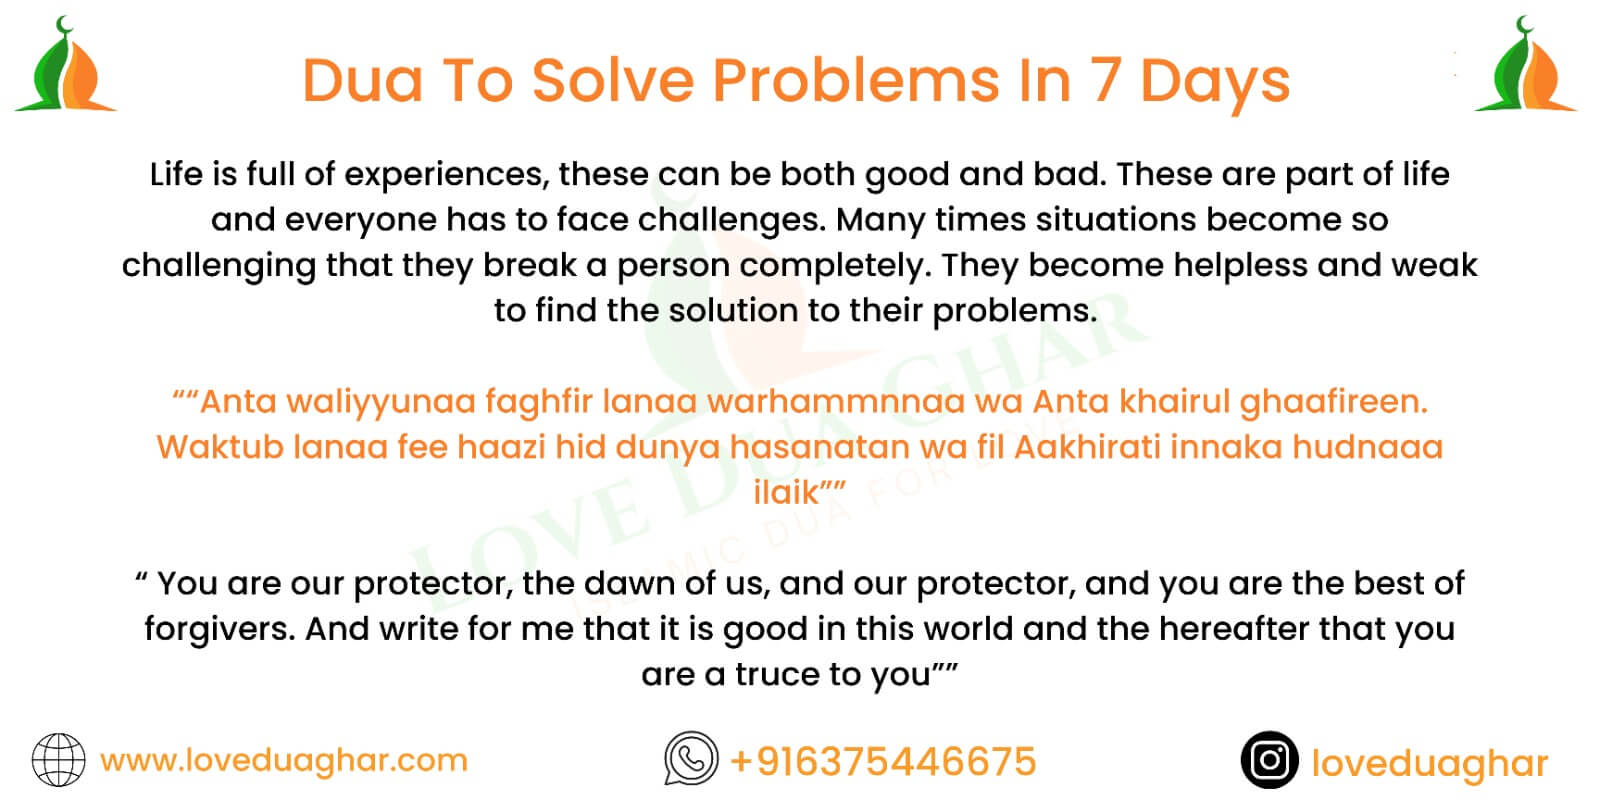 Dua To Solve Problems In 7 Days